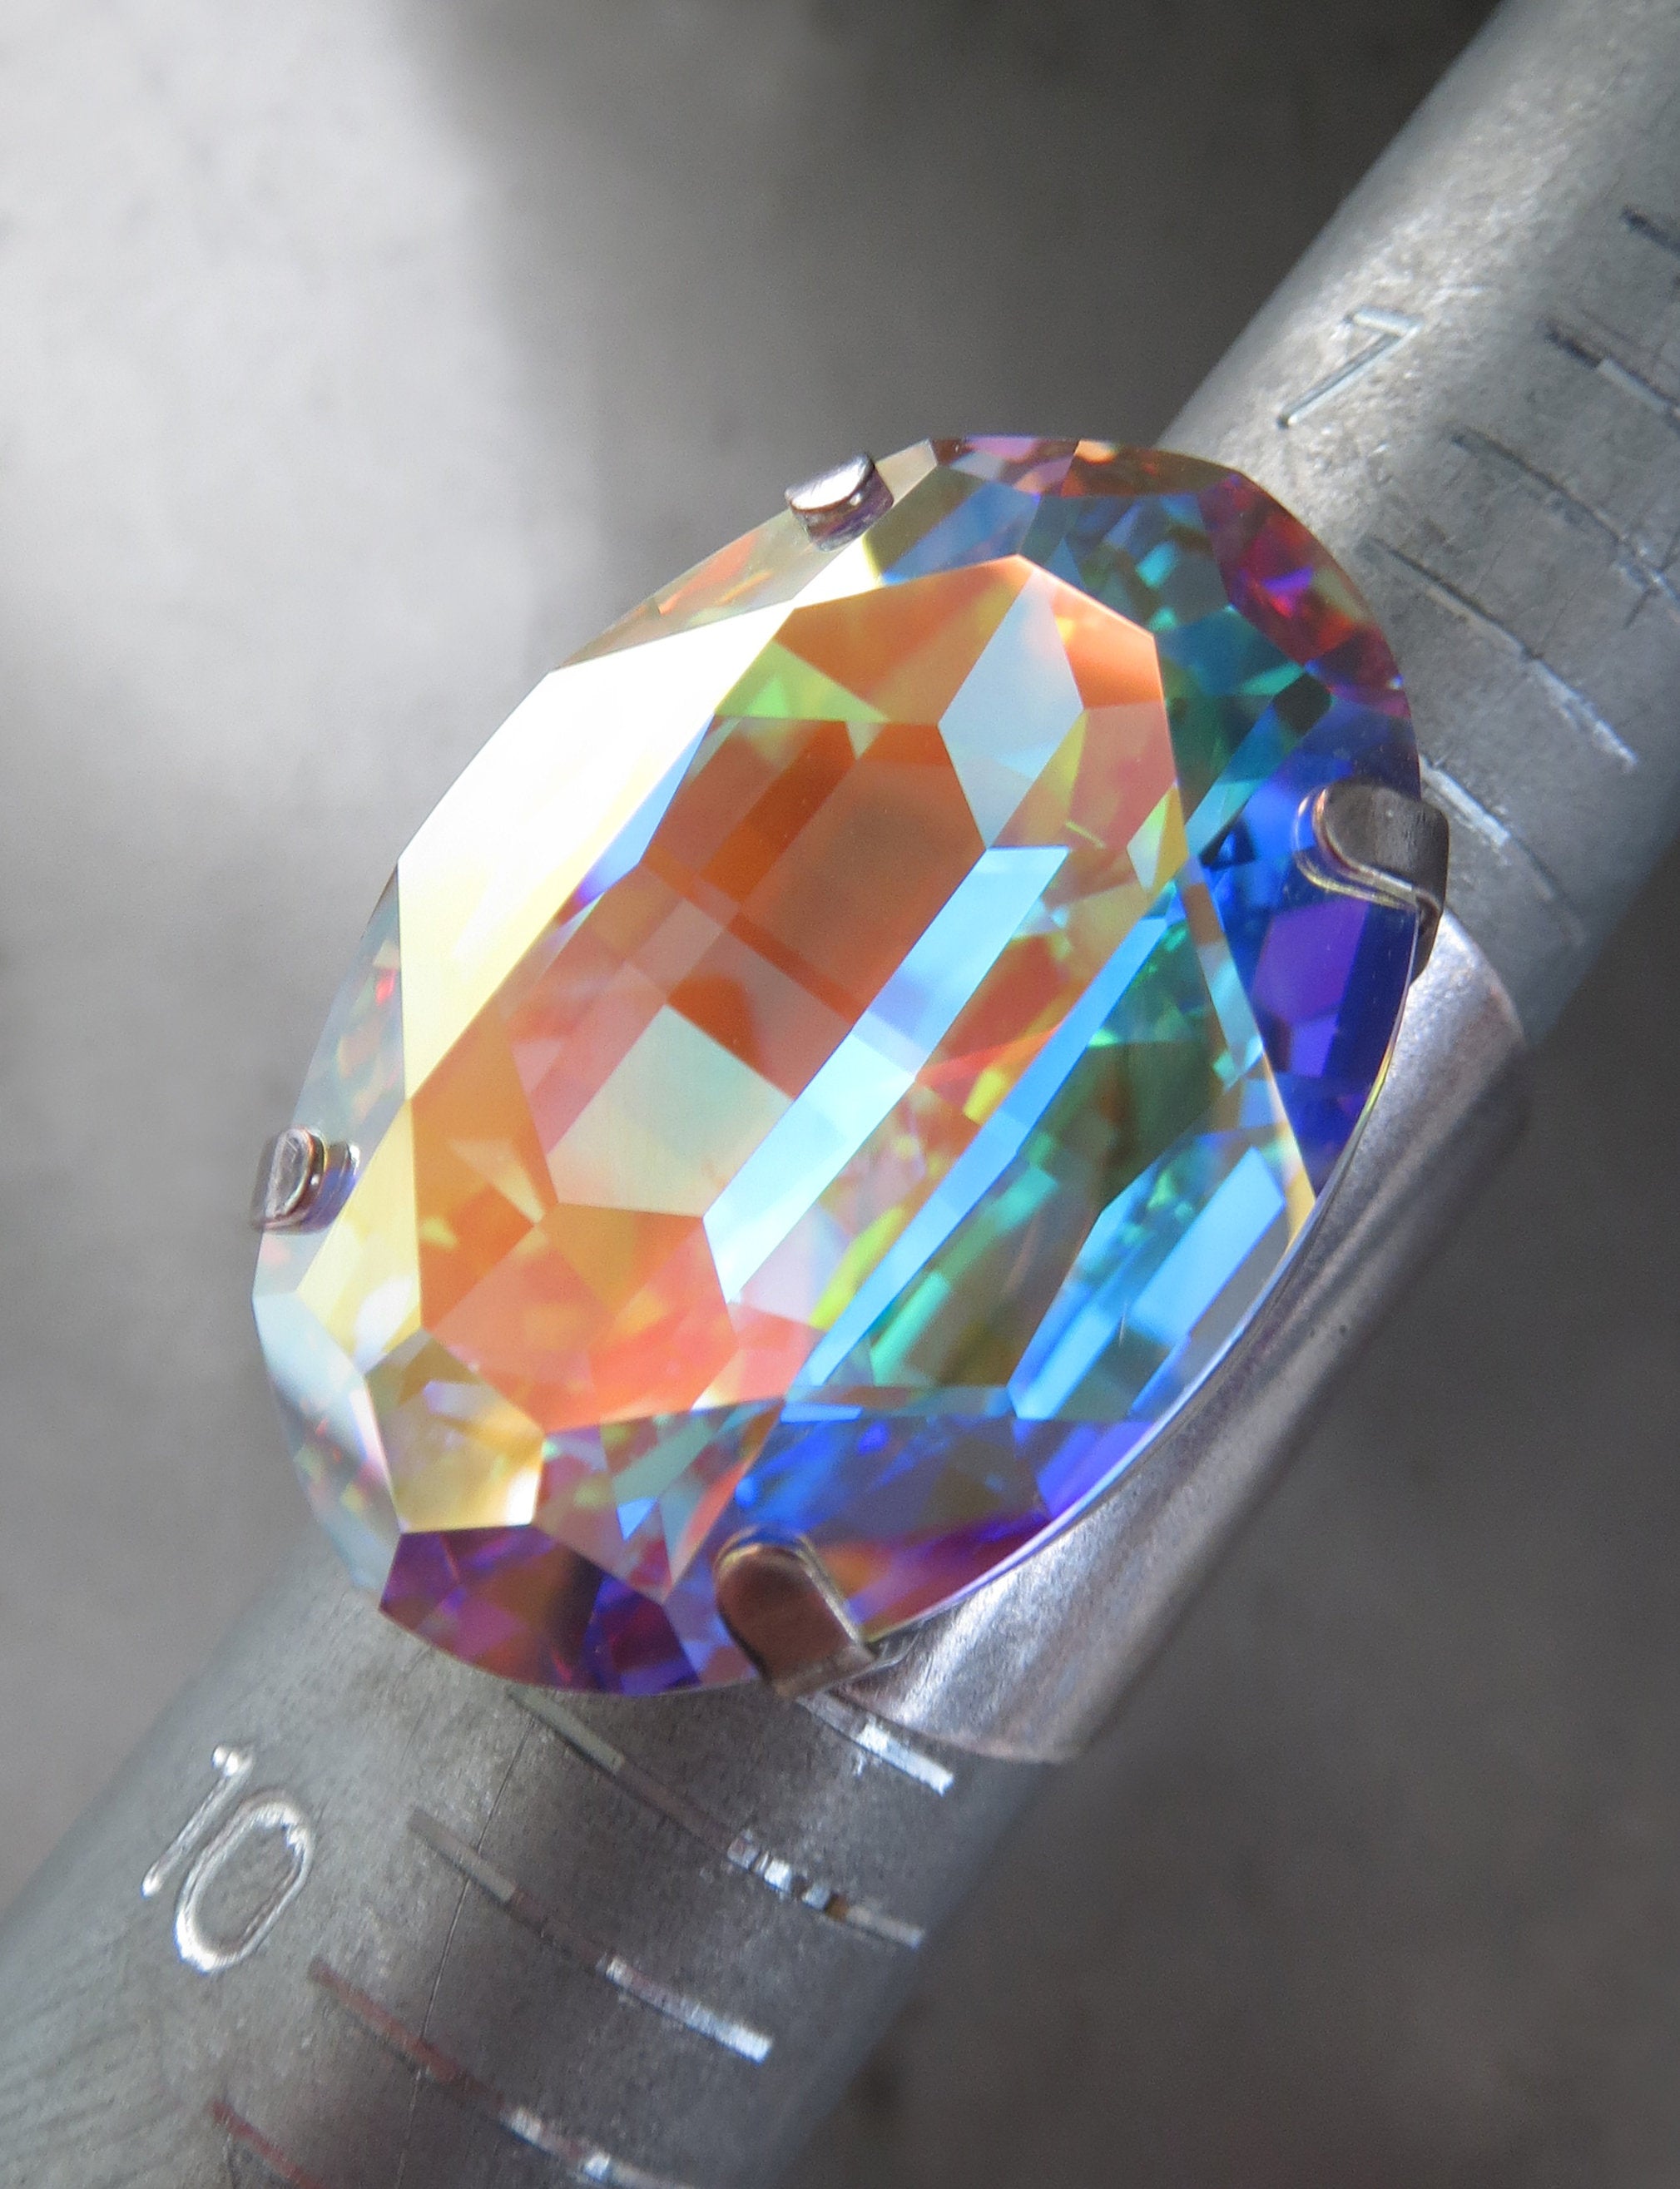 EXALTED - Large Oval Crystal Cocktail Ring - Swarovski Crystal AB - Shimmering Colorful Multicolor Pastel Flashes of Color - Adjustable Band